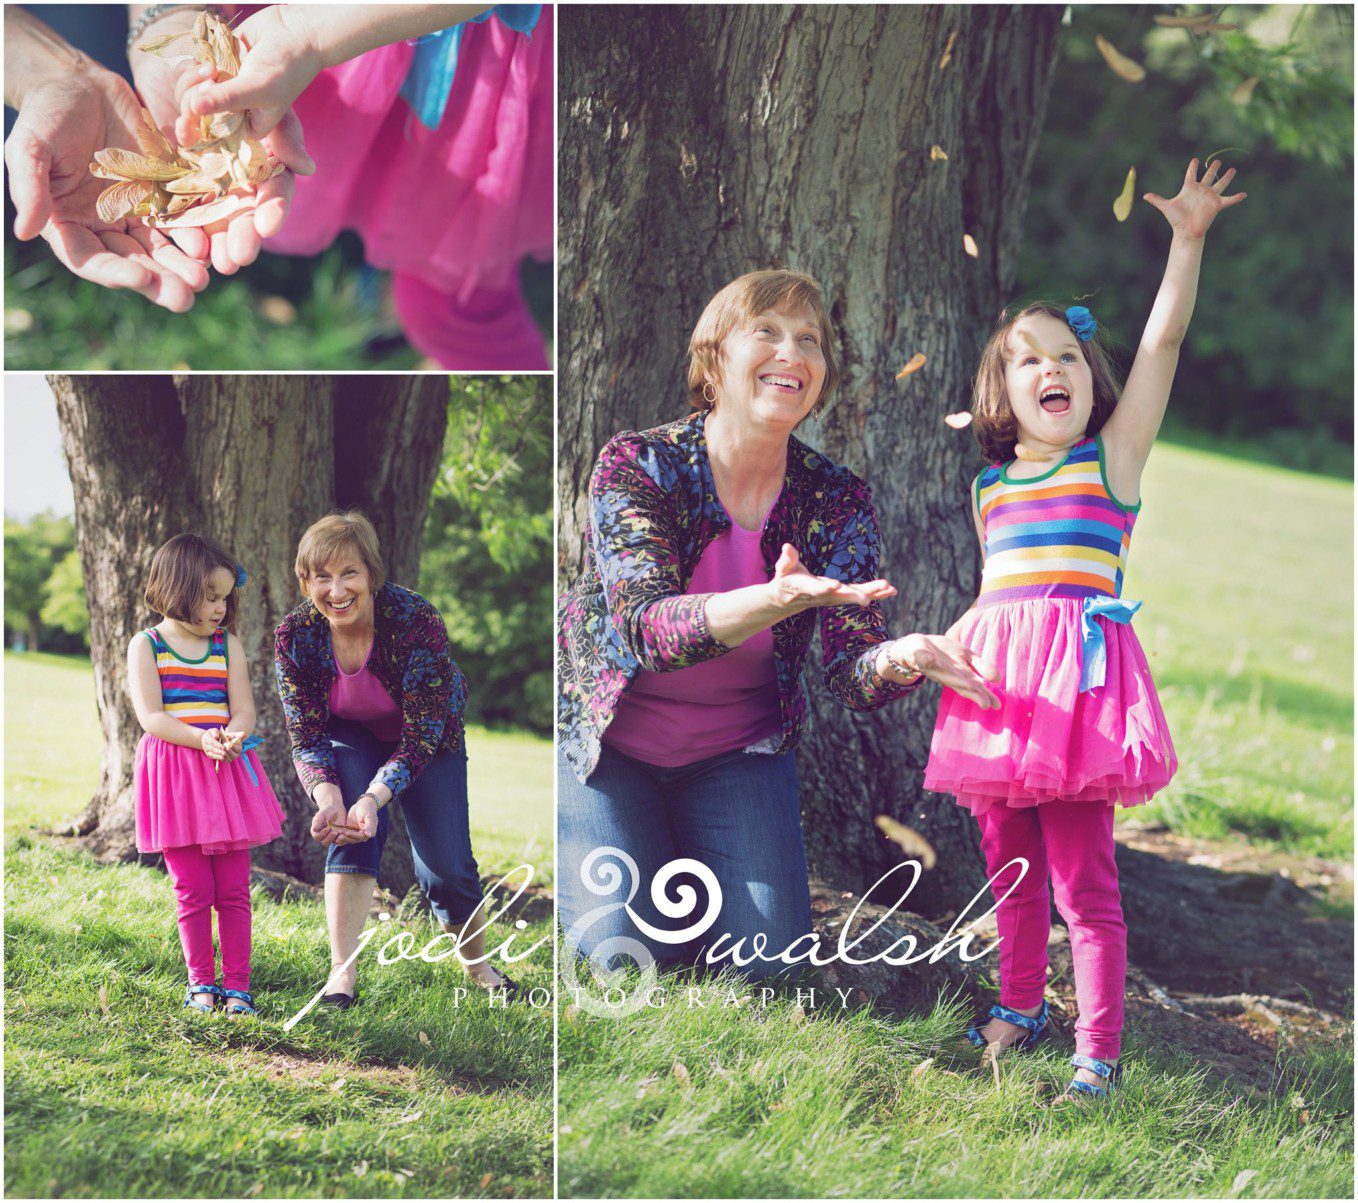 grandmother and granddaughter tossing helicopters (seeds) in the air under a tree